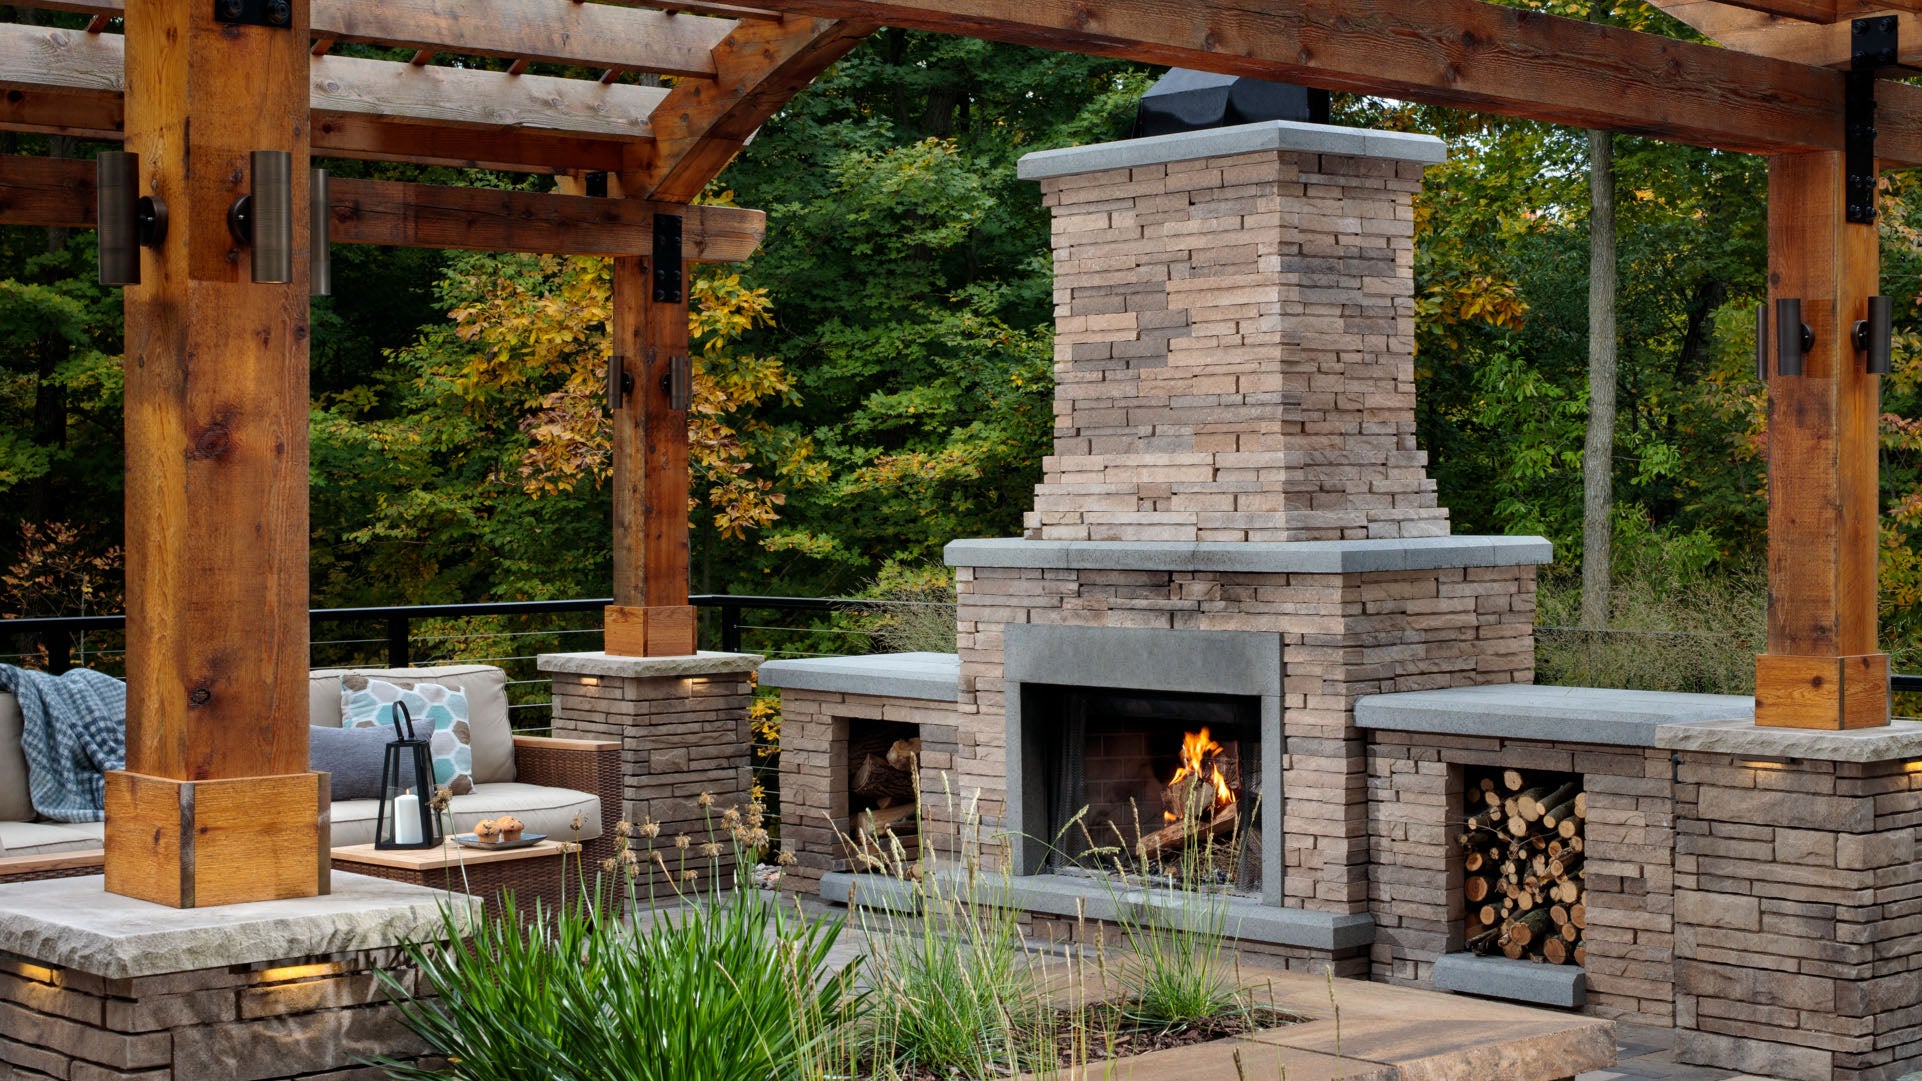 Outdoor Kitchens Stone Fireplaces, Pictures Of Outdoor Stone Fireplaces